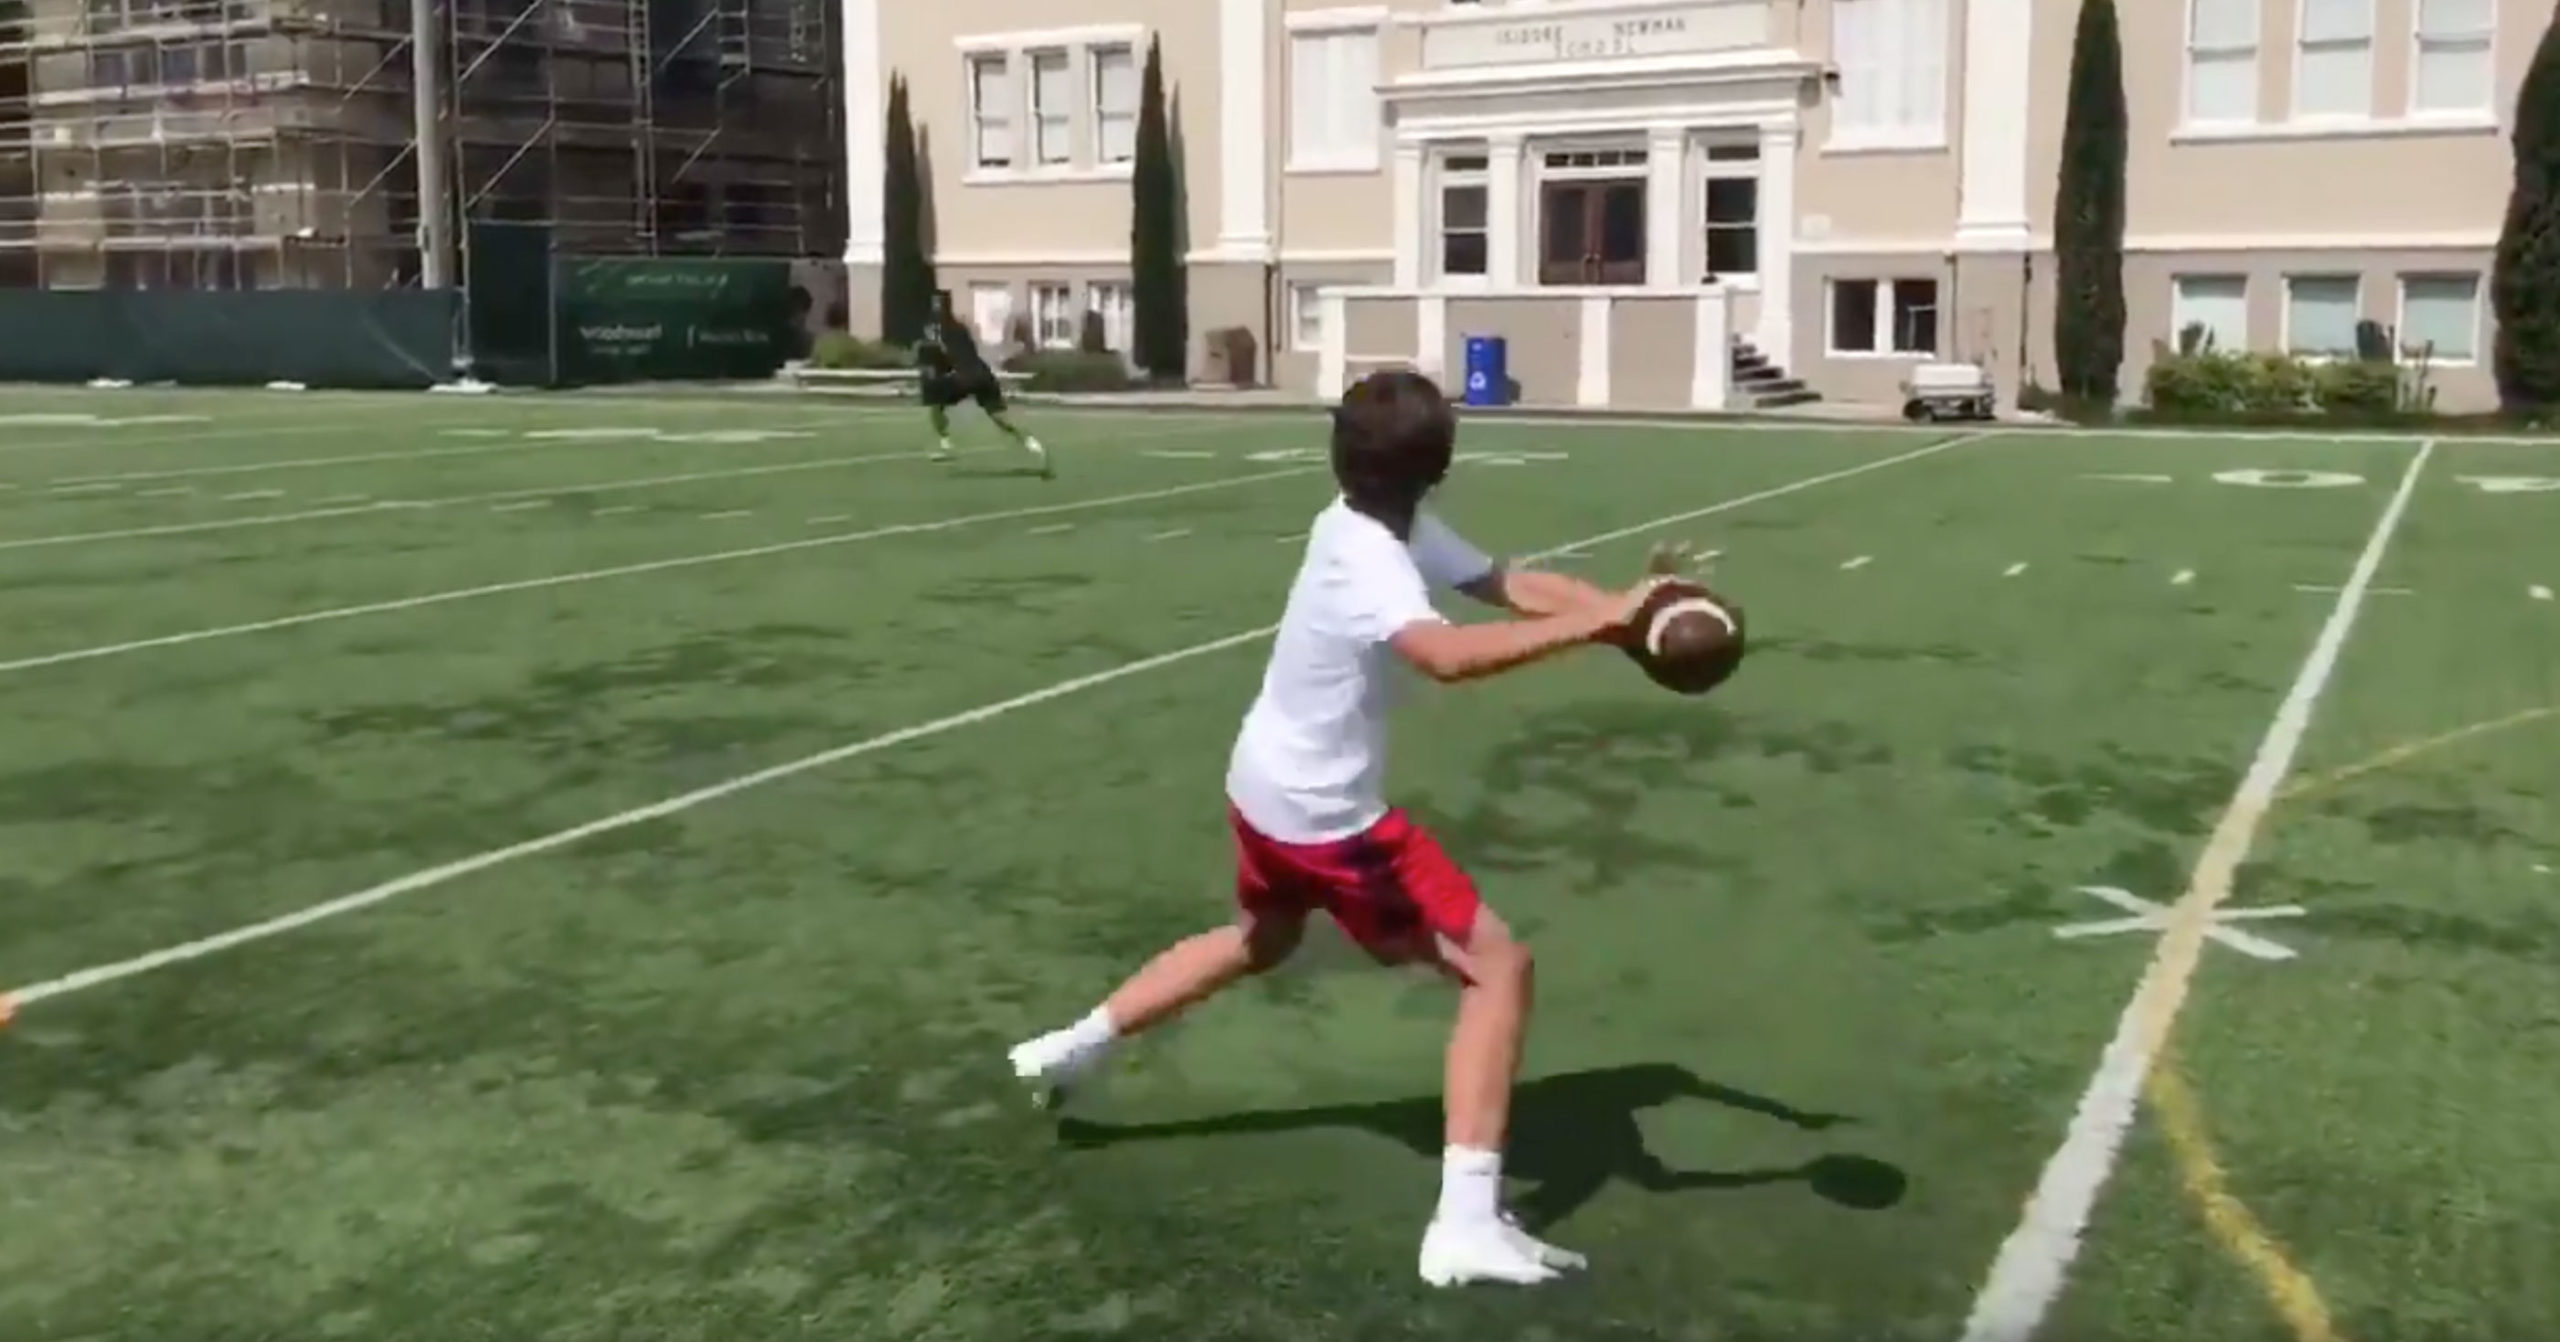 Www My 20very 20first 20time Com - The Newest Manning Looks Primed To Be The Next Great Family QB And He's  Only In 7th Grade (VIDEO)